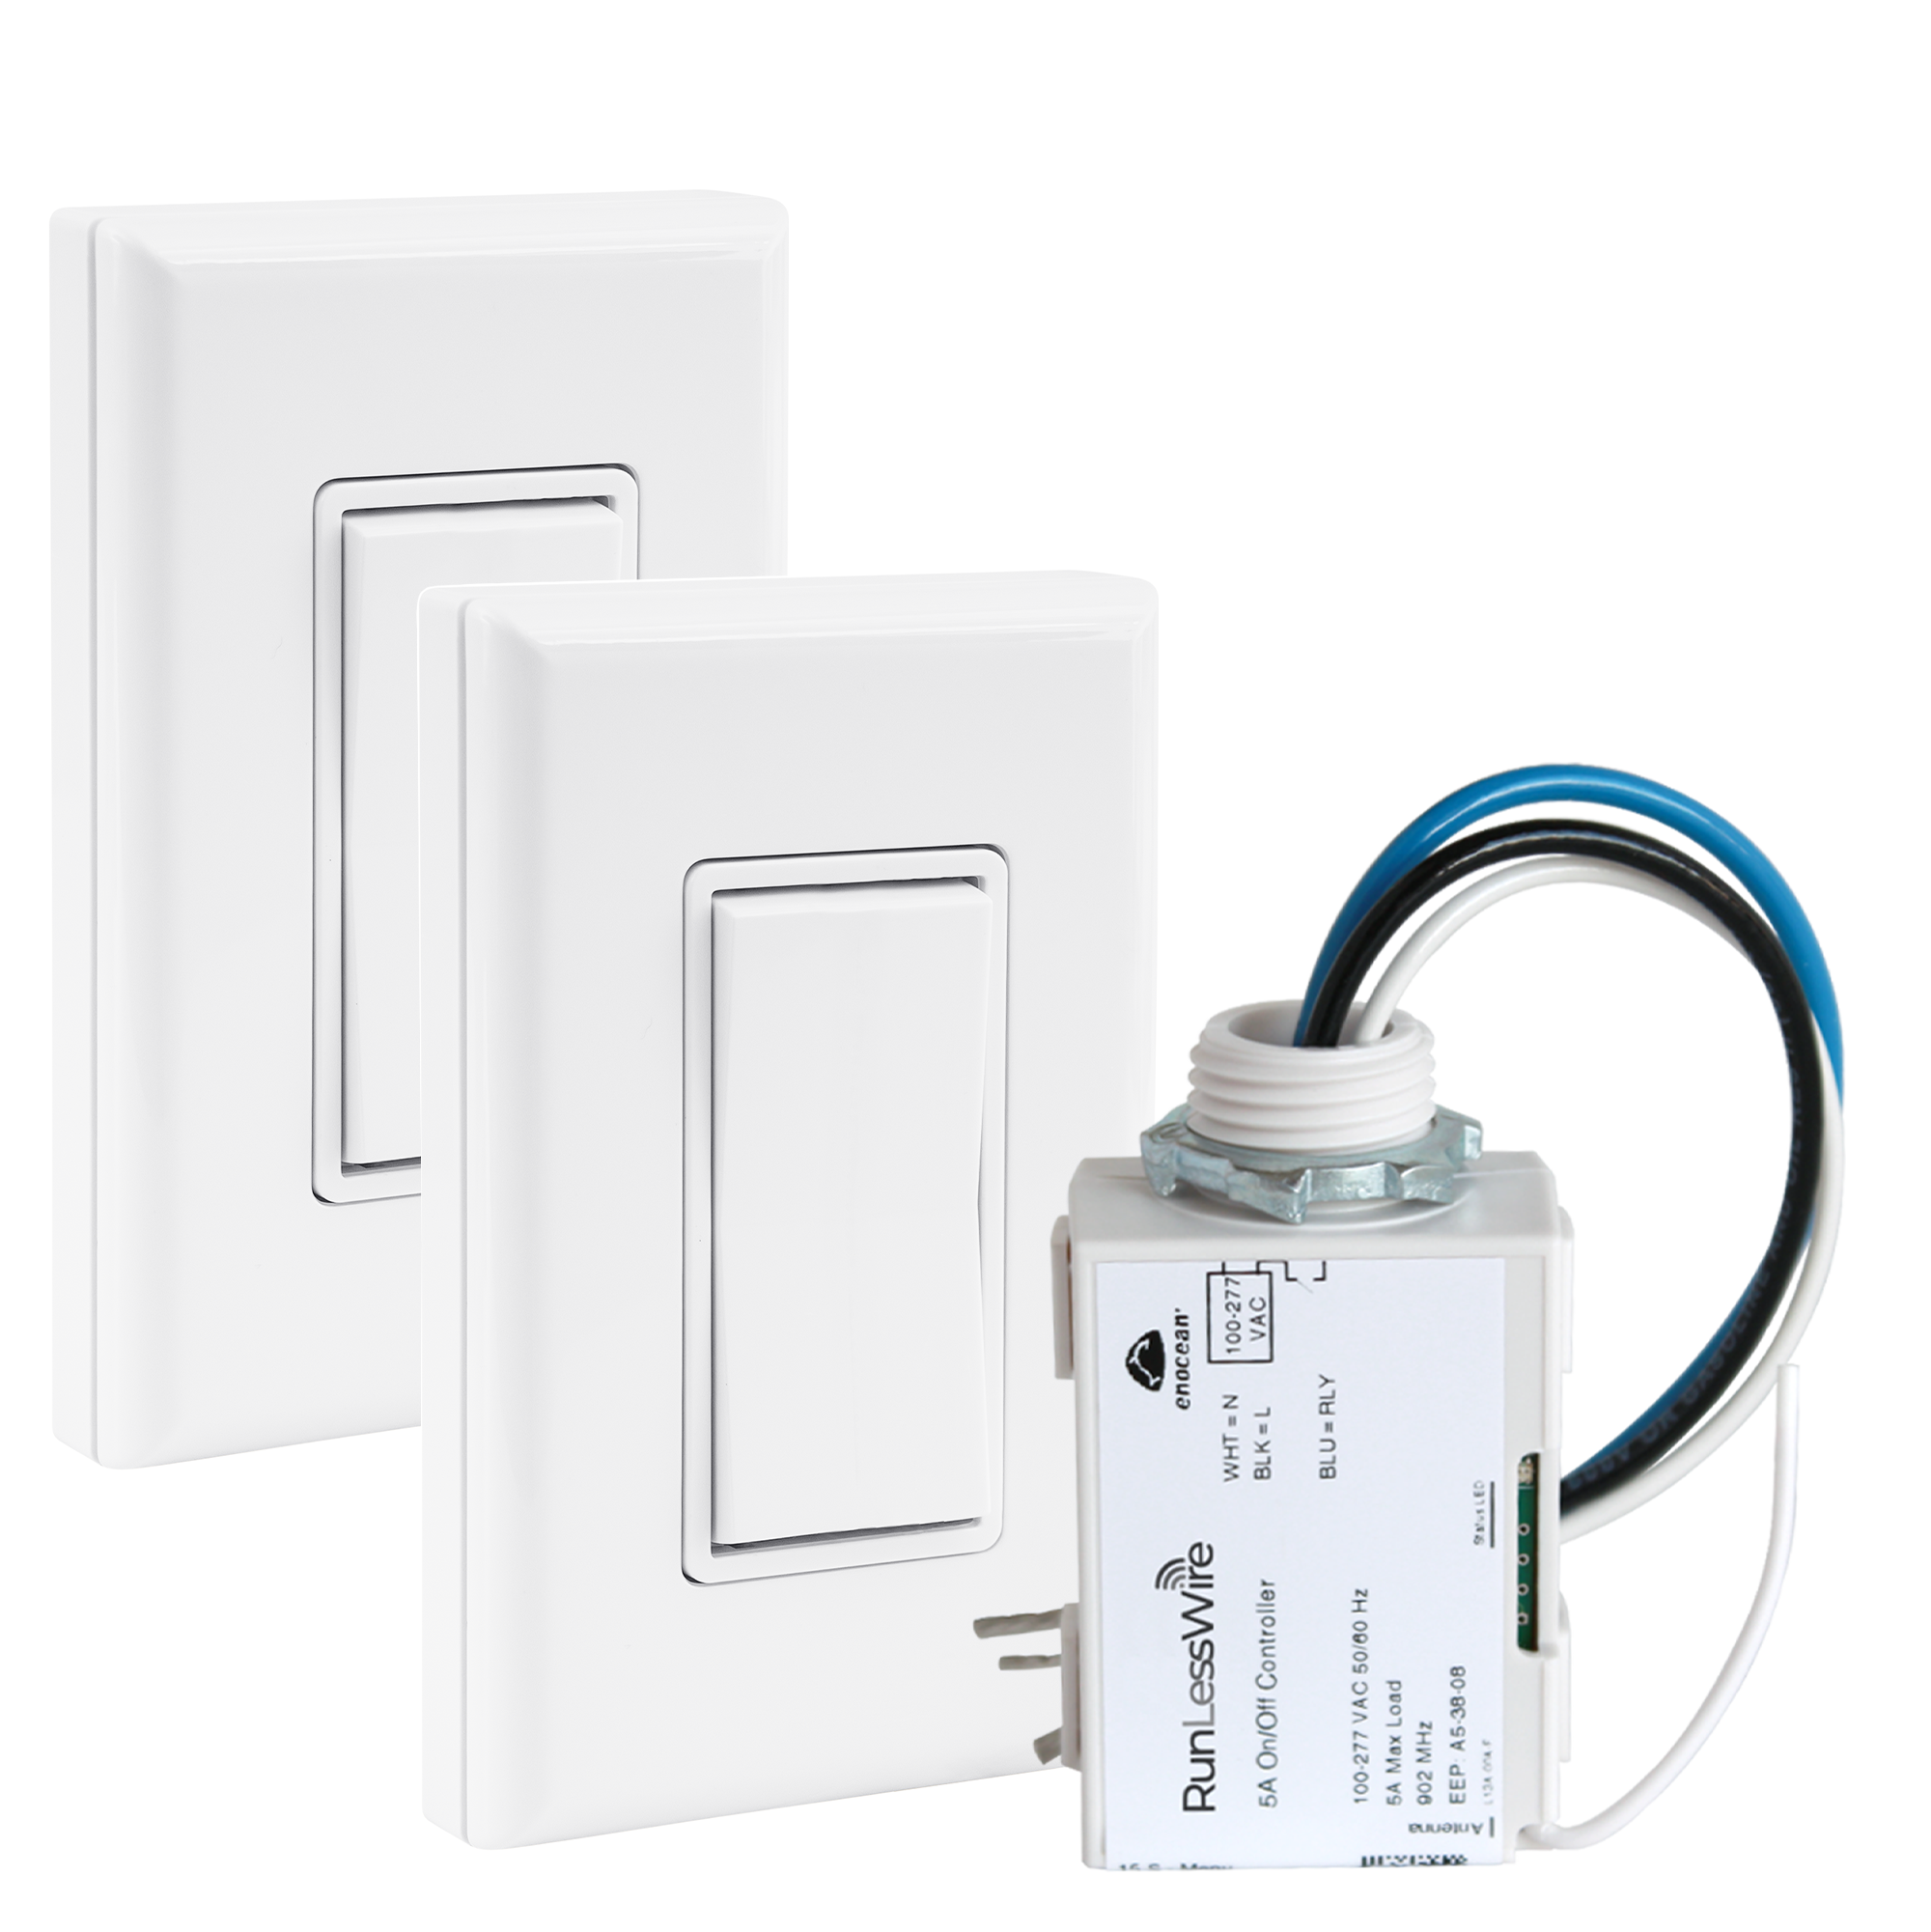 Plug-in Dimmer/Relay Wireless Light Switch Kit